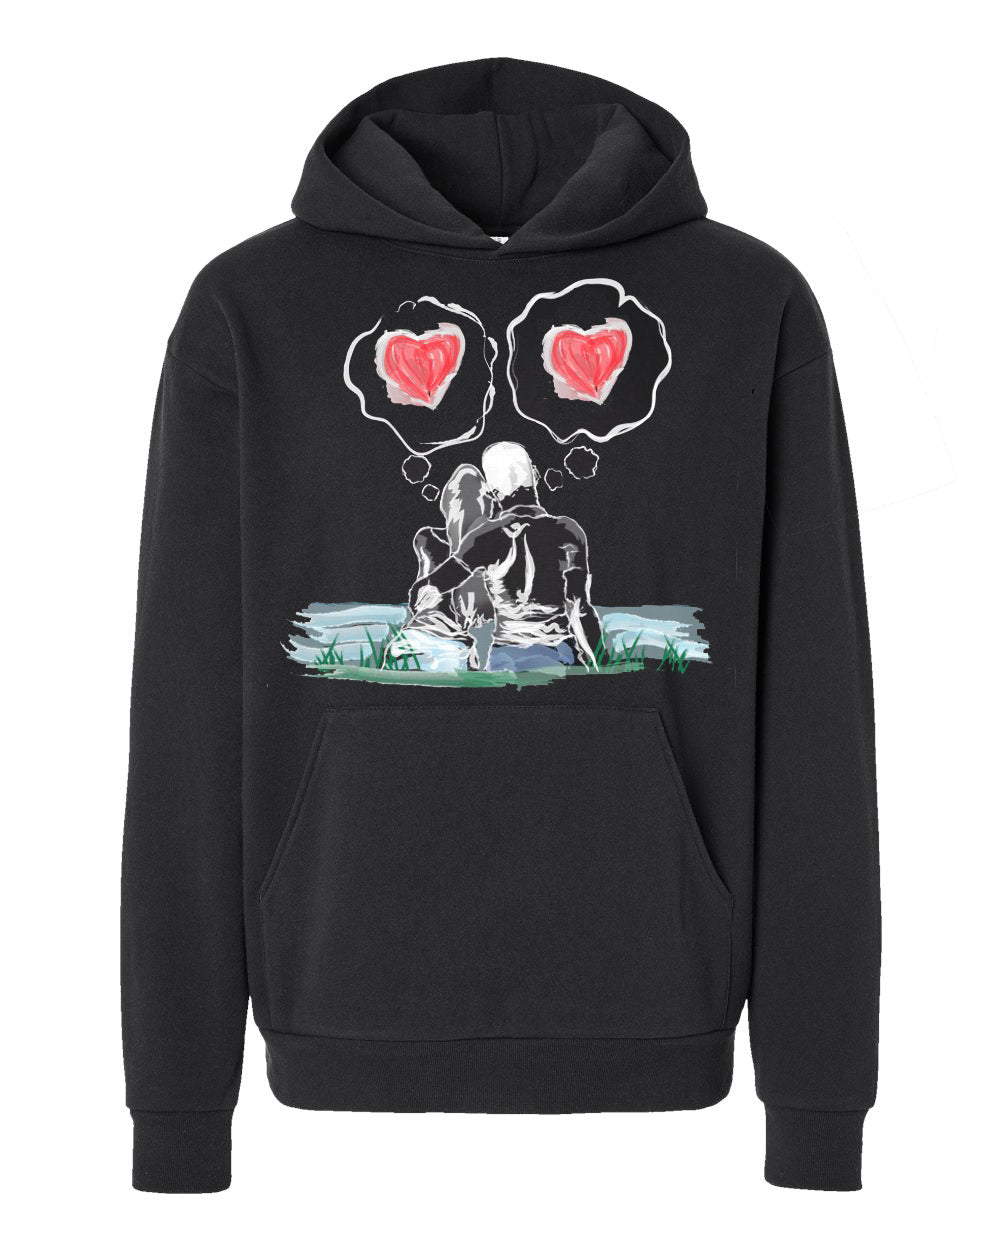 Guy Benson Collection "Love Is In The Air" Hoodie -Black